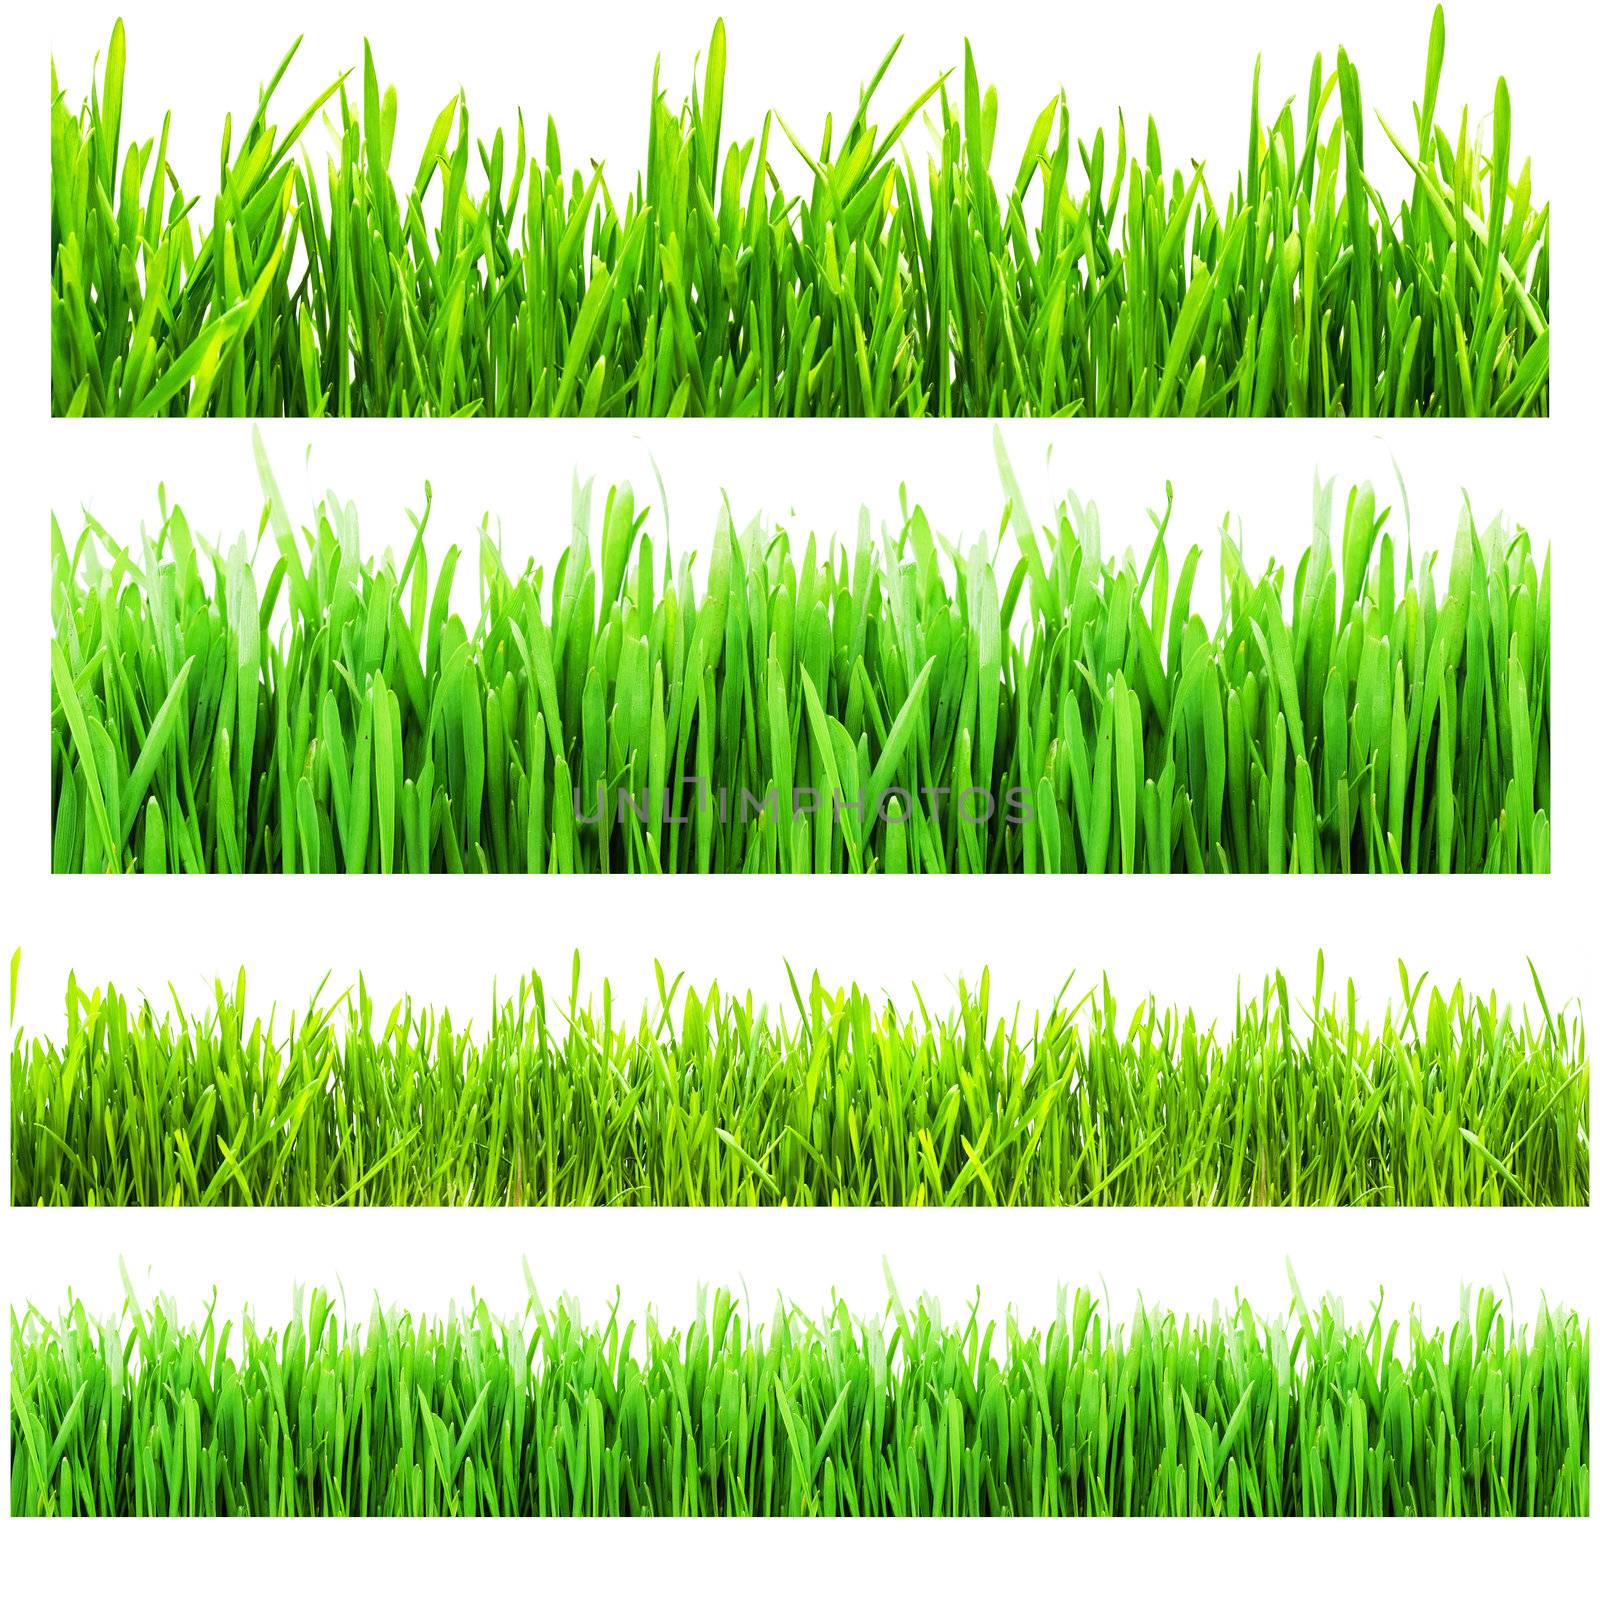 Four types of green grass isolated on a white background